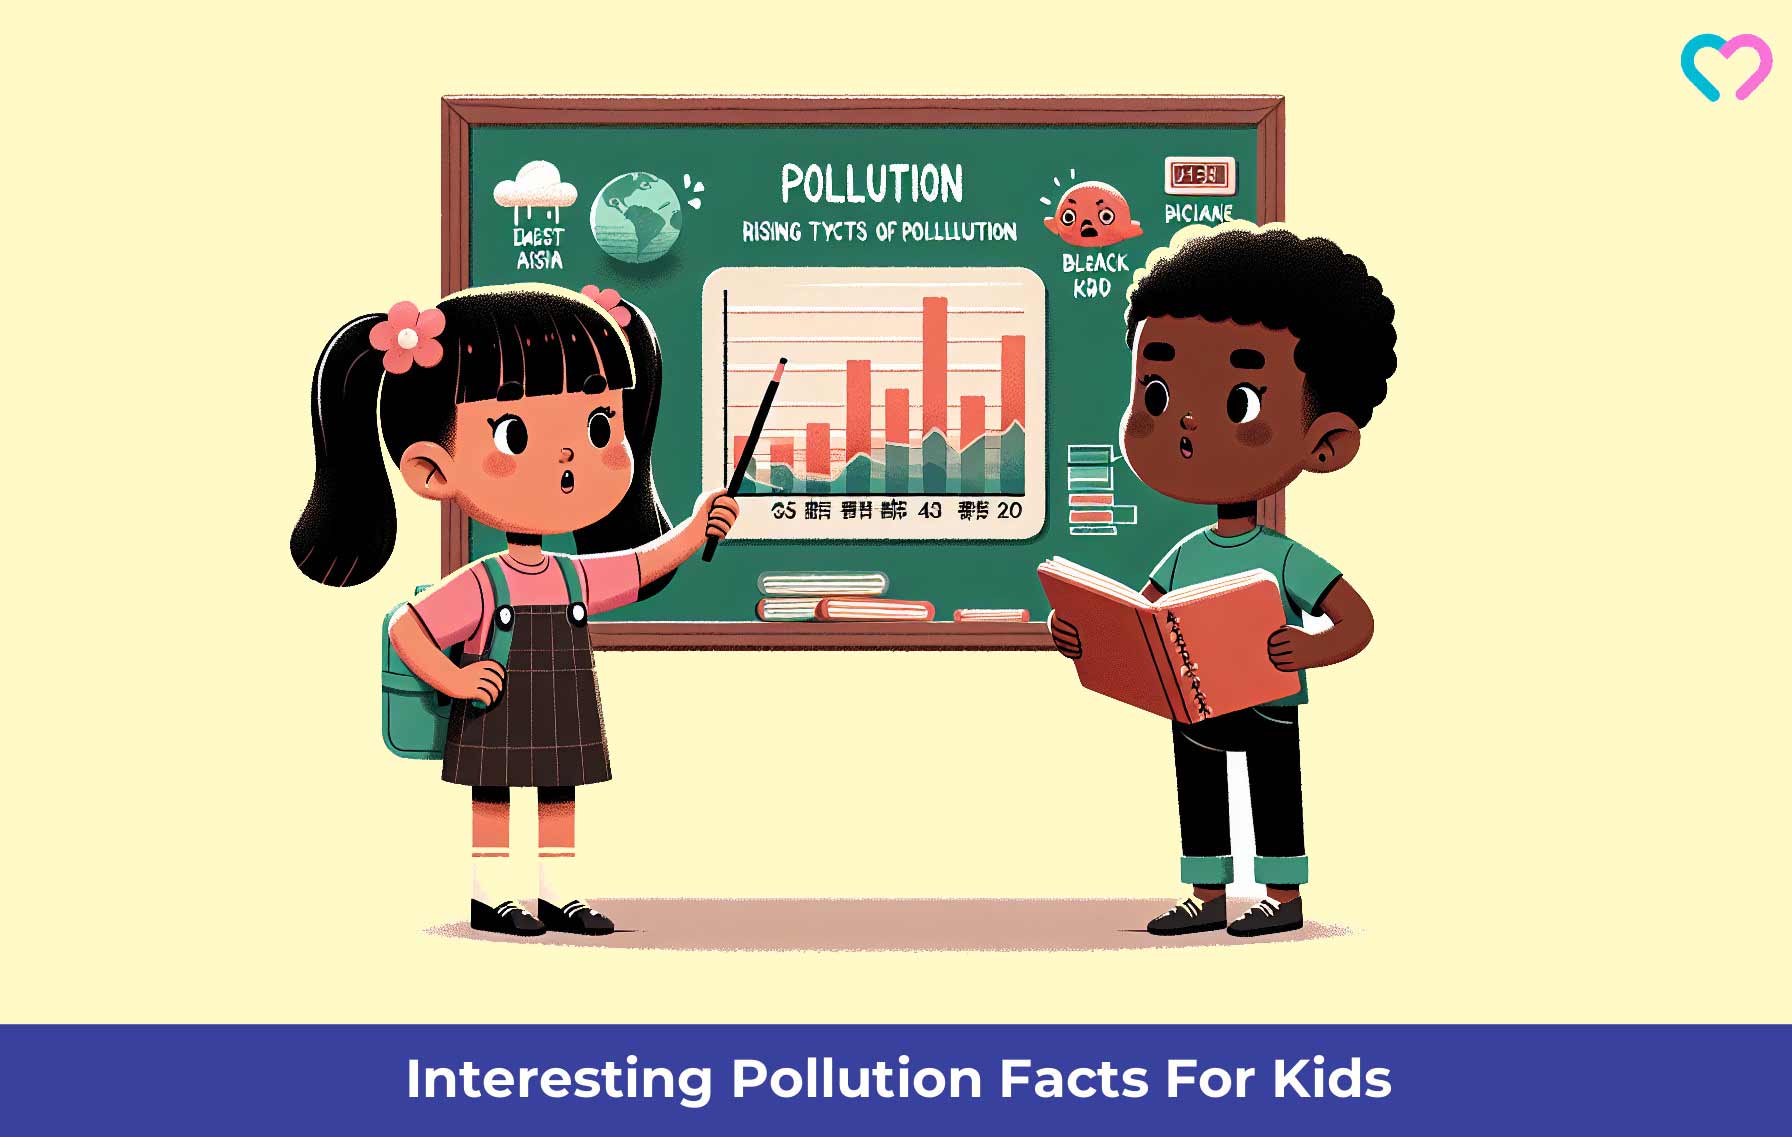 pollution facts for kids_illustration